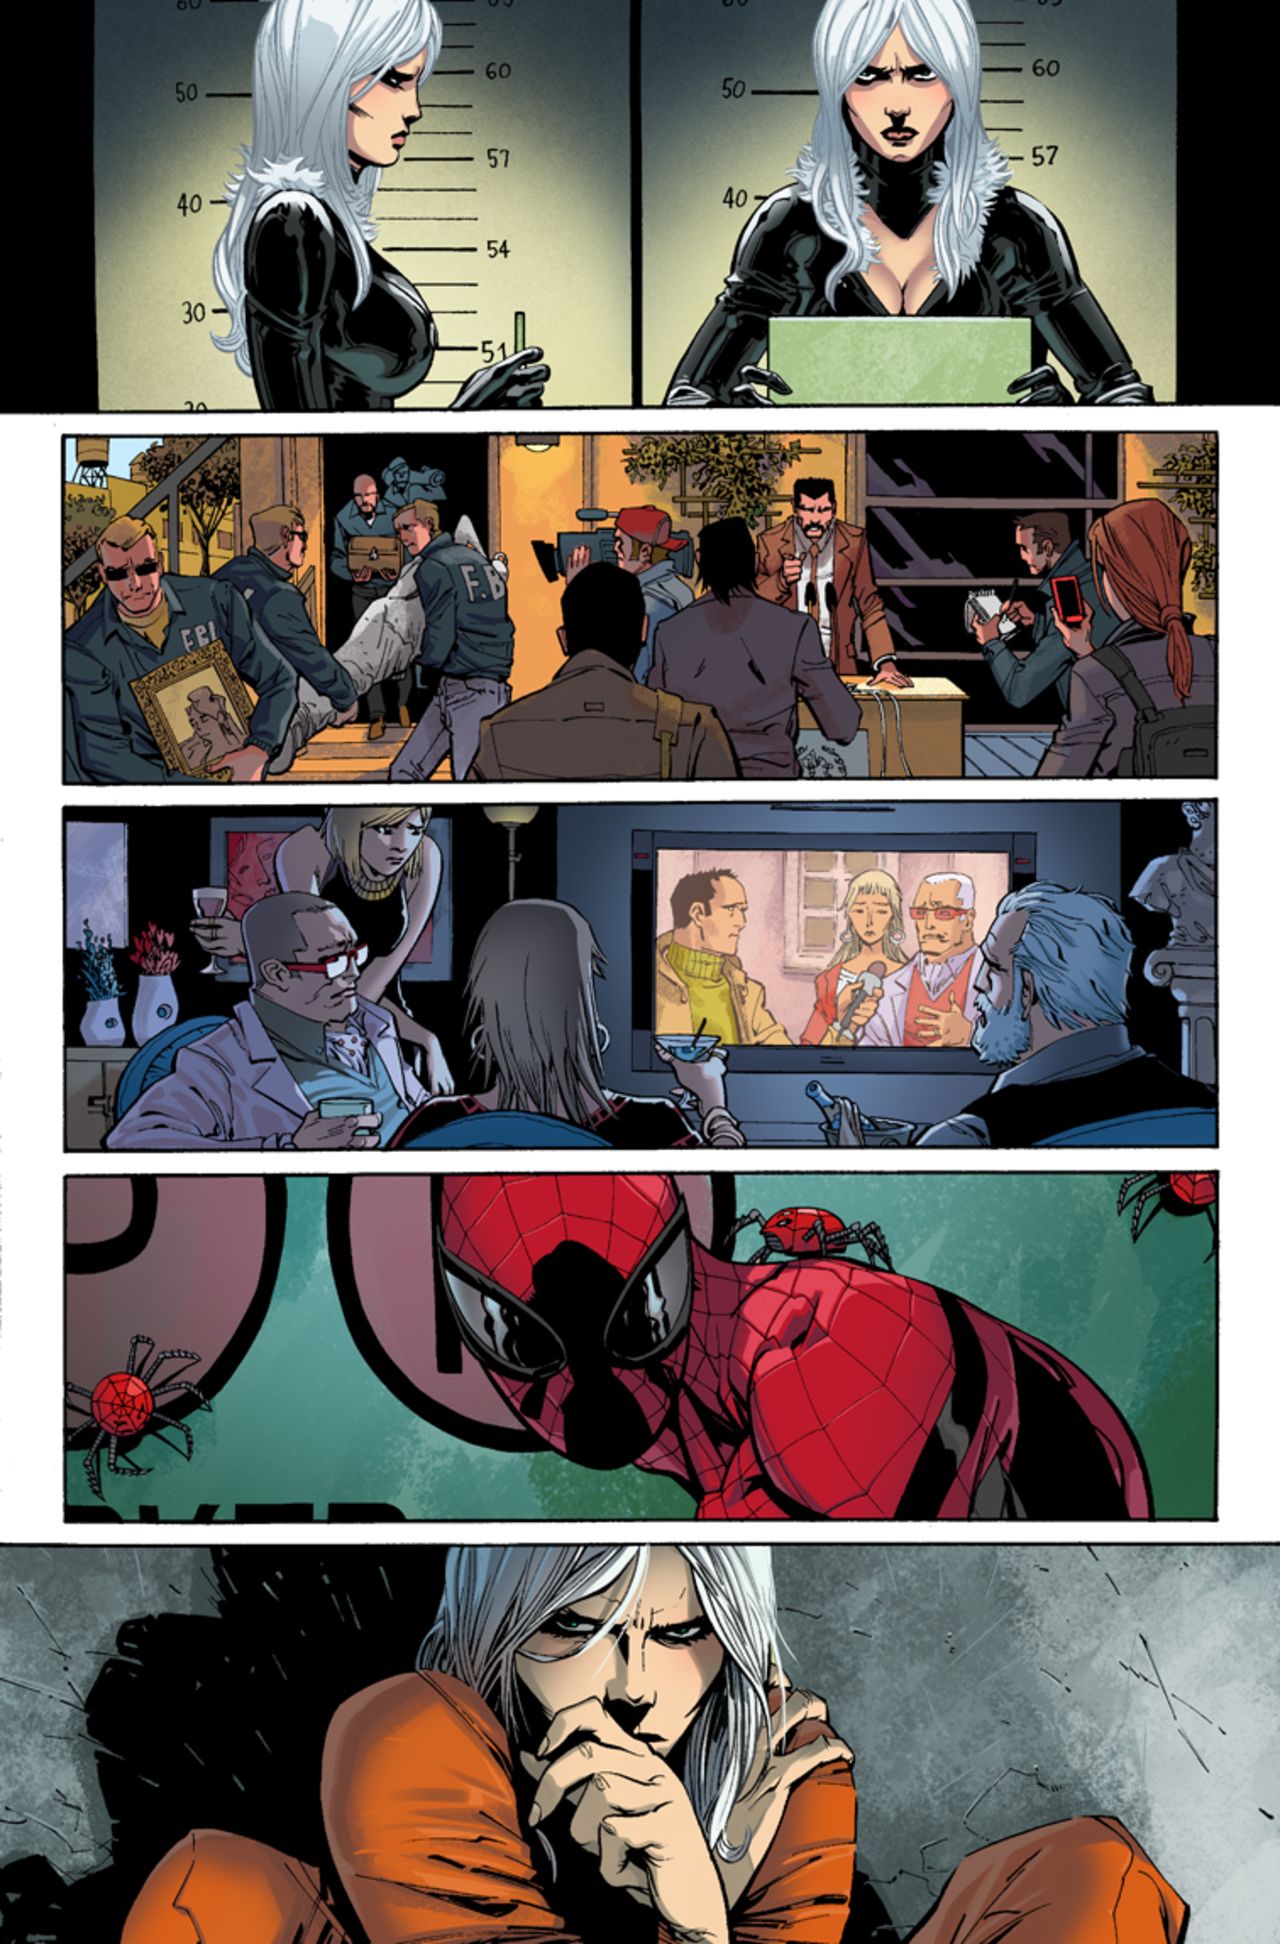 Another frame from "Amazing Spider-Man" #1.